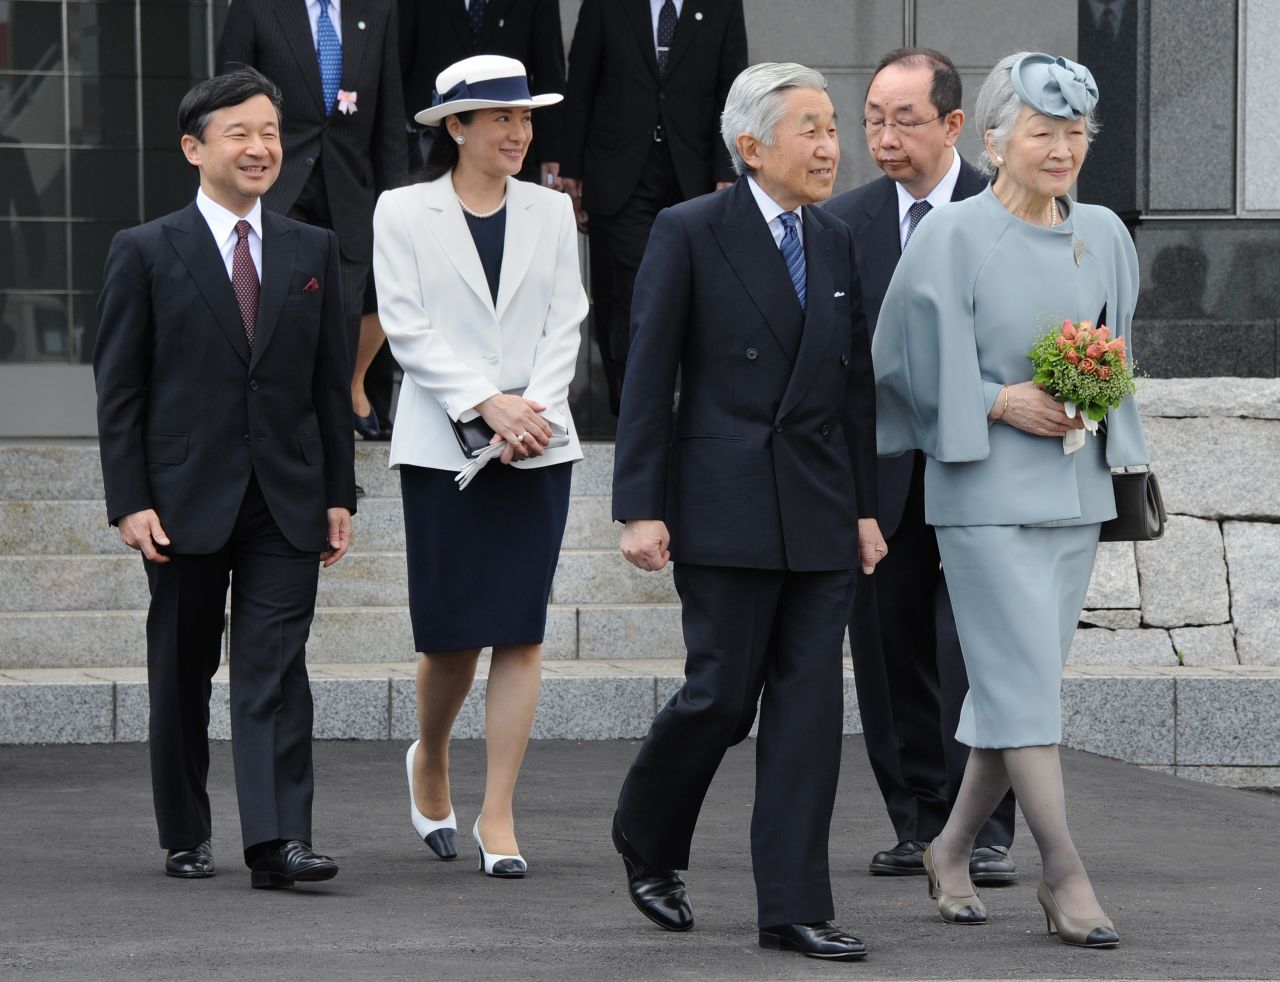 Naruhito and Masako trail Emperor Akihito and Empress Michiko as they leave for Great Britain in 2012. They were going to attend a ceremony for Queen Elizabeth II's diamond jubilee.